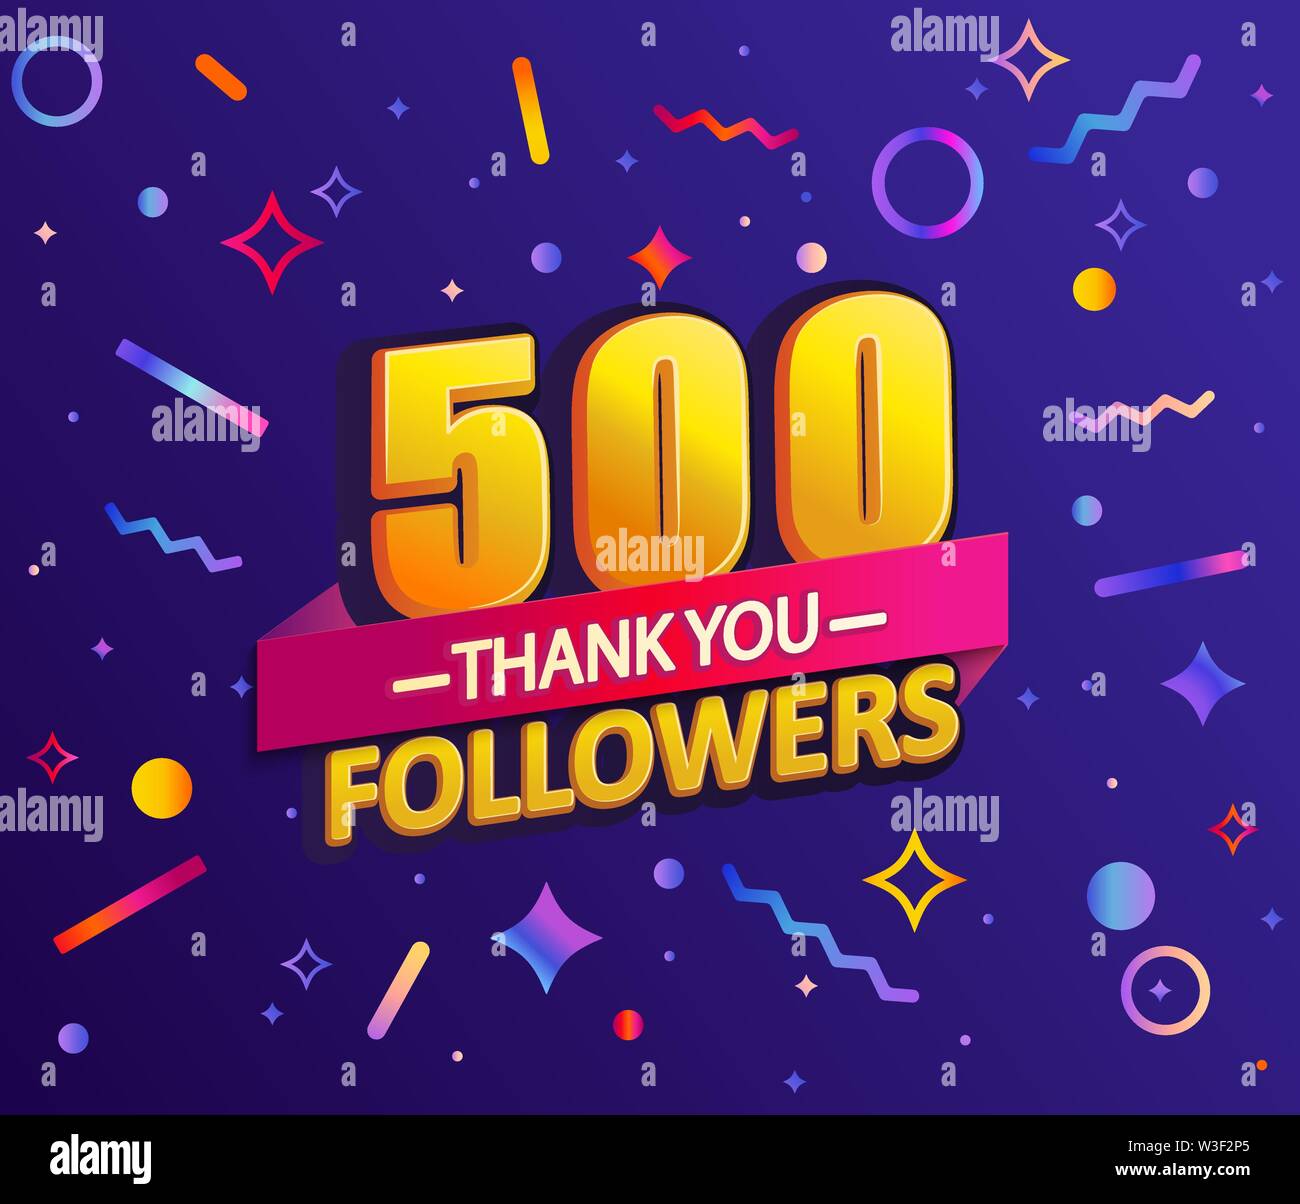 Thank you 500 followers, thanks banner. Stock Vector